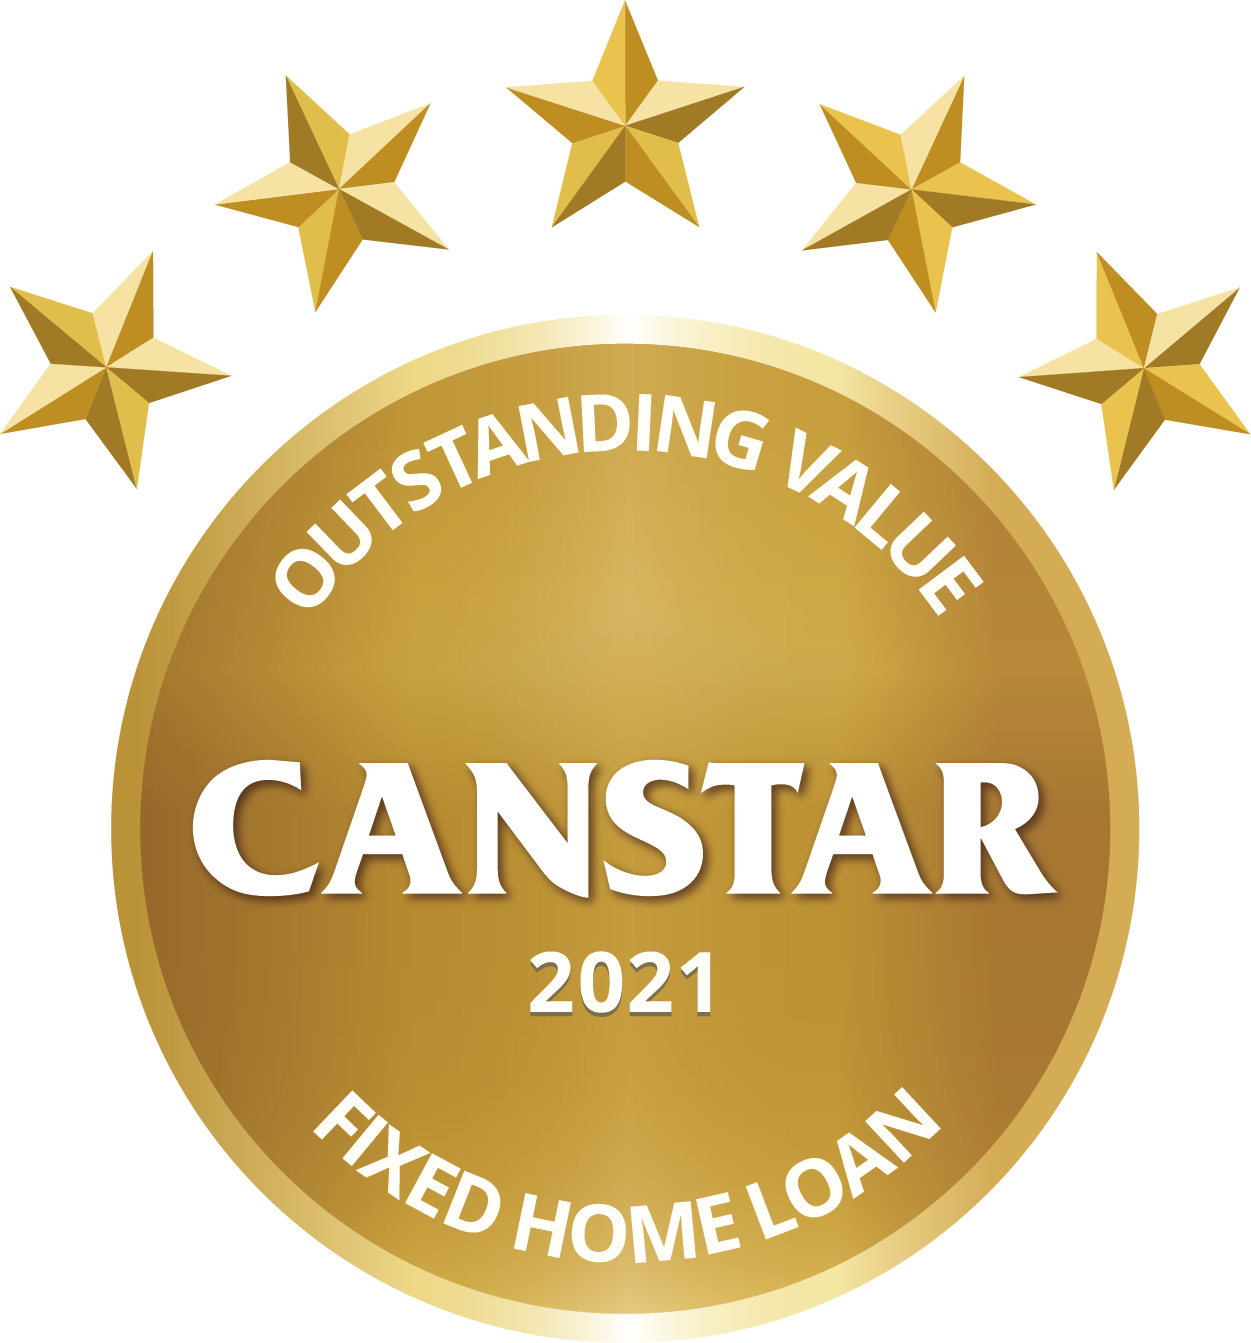 Canstar Outstanding Value Fixed Home Loan 2021